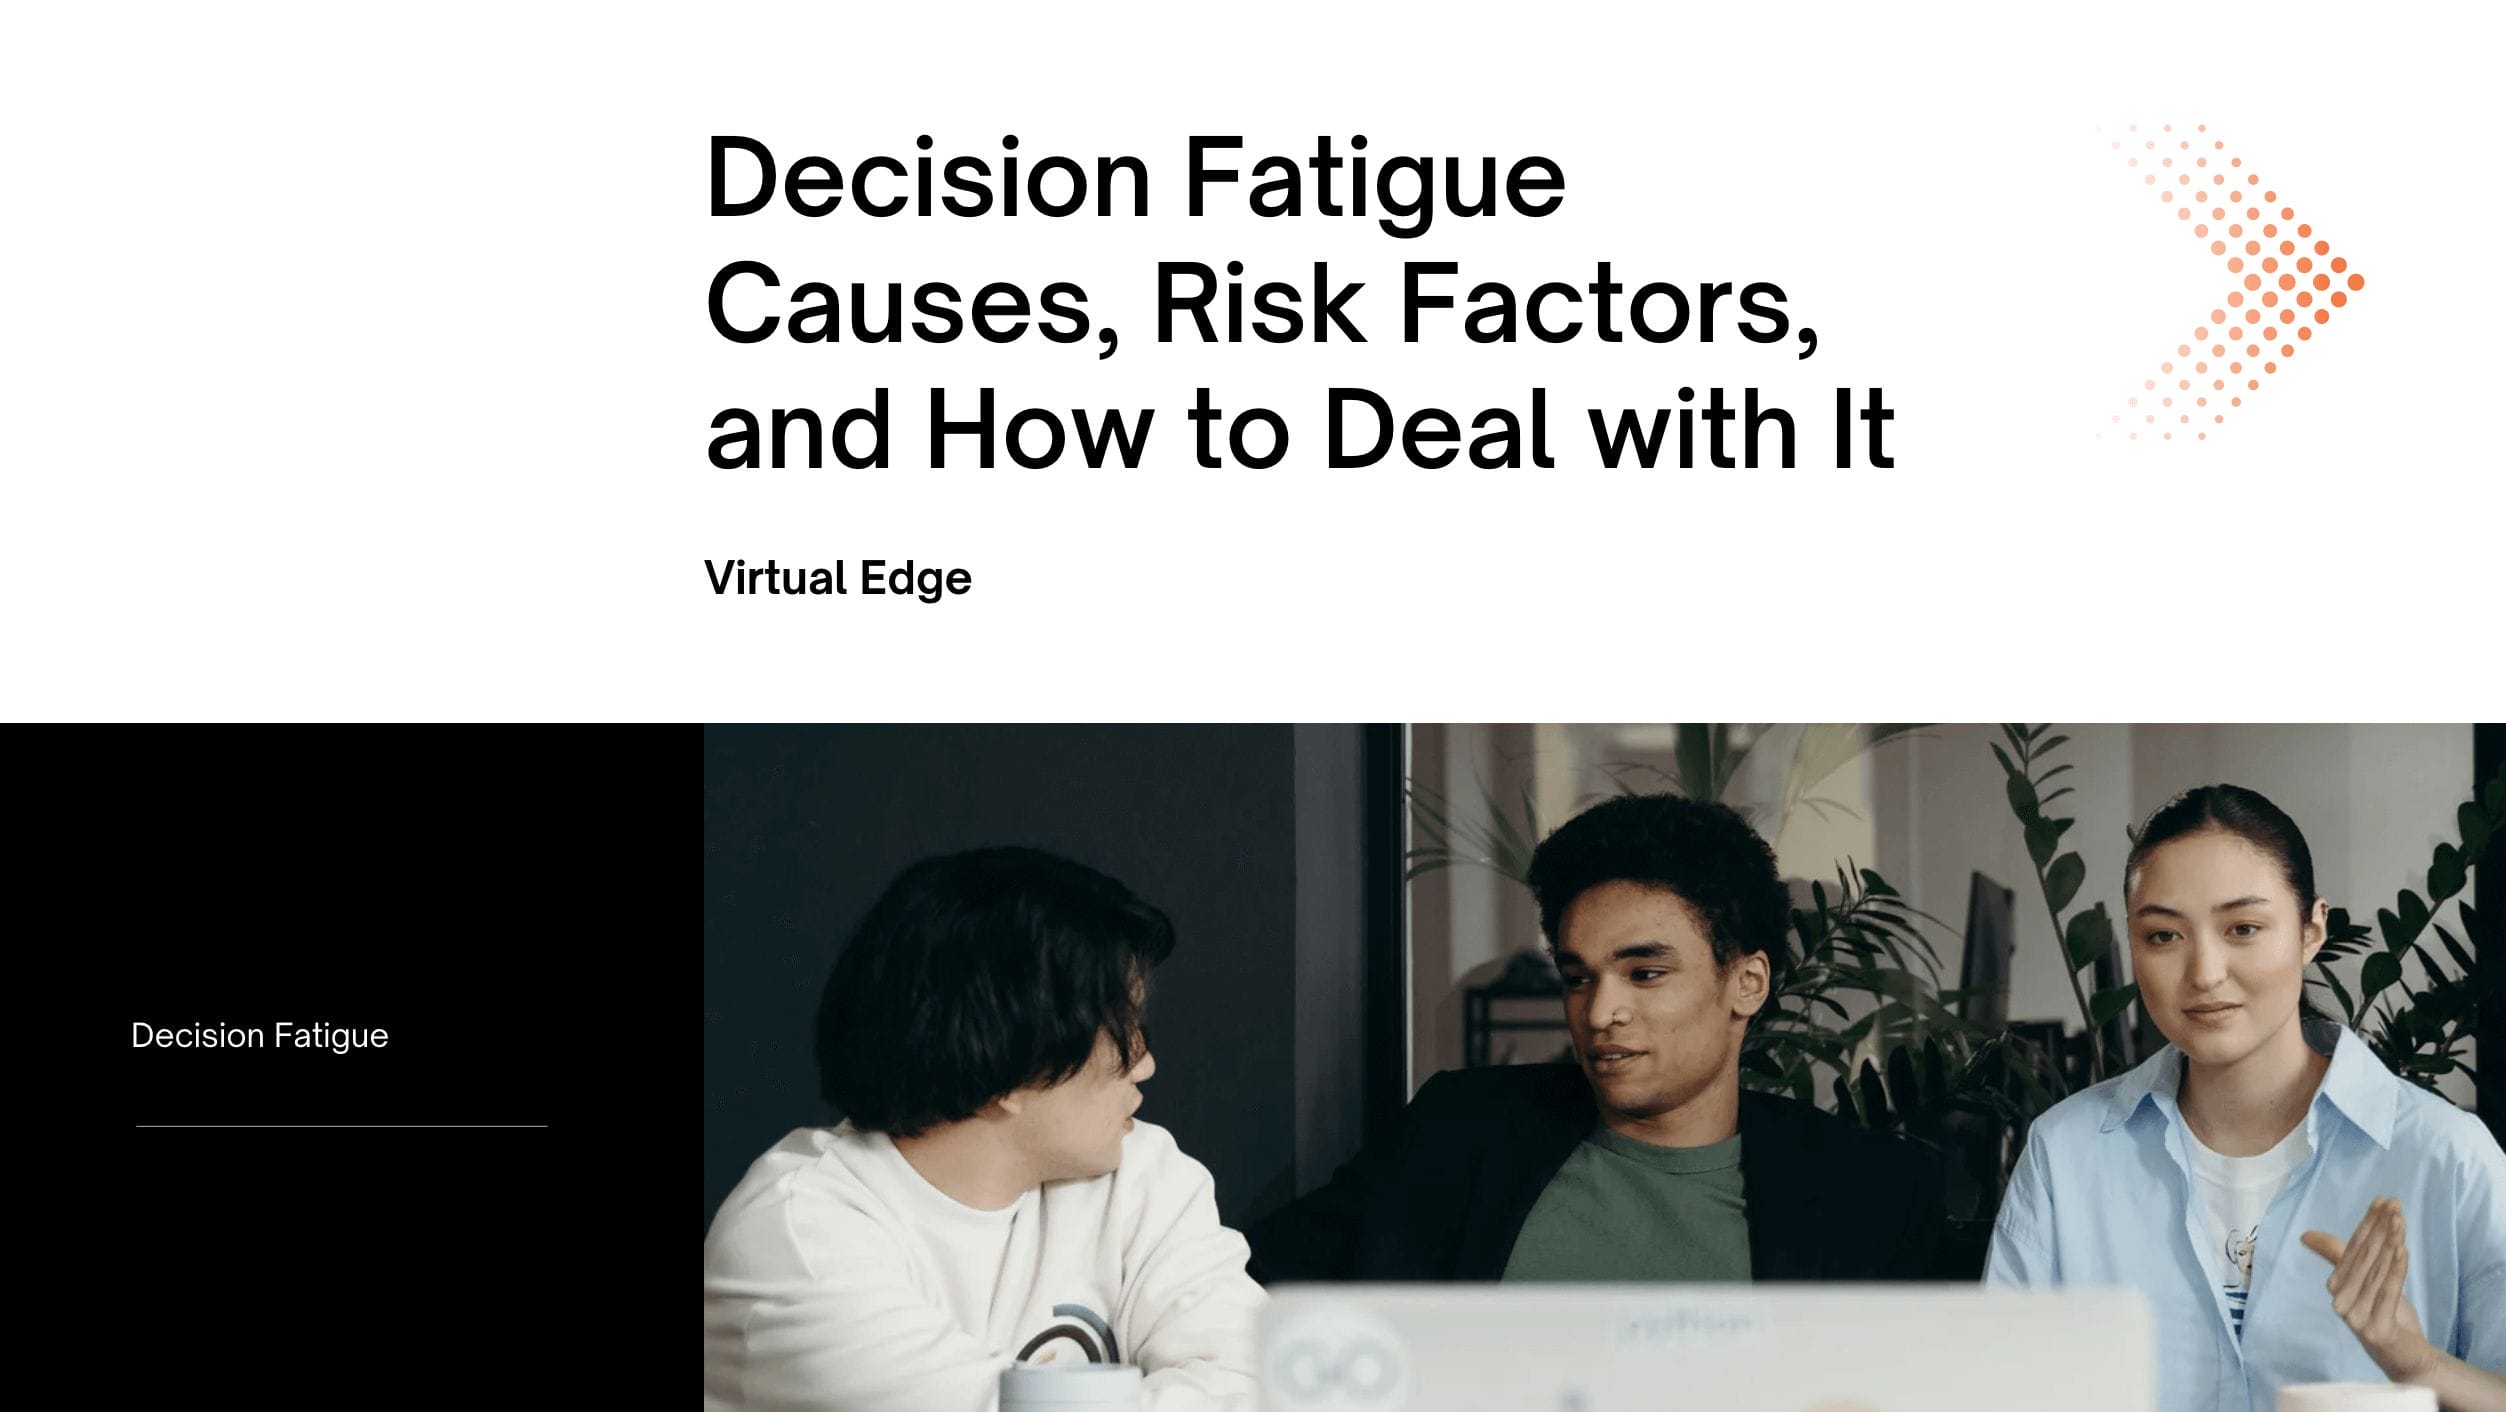 Decision Fatigue Causes, Risk Factors, and How to Deal with It